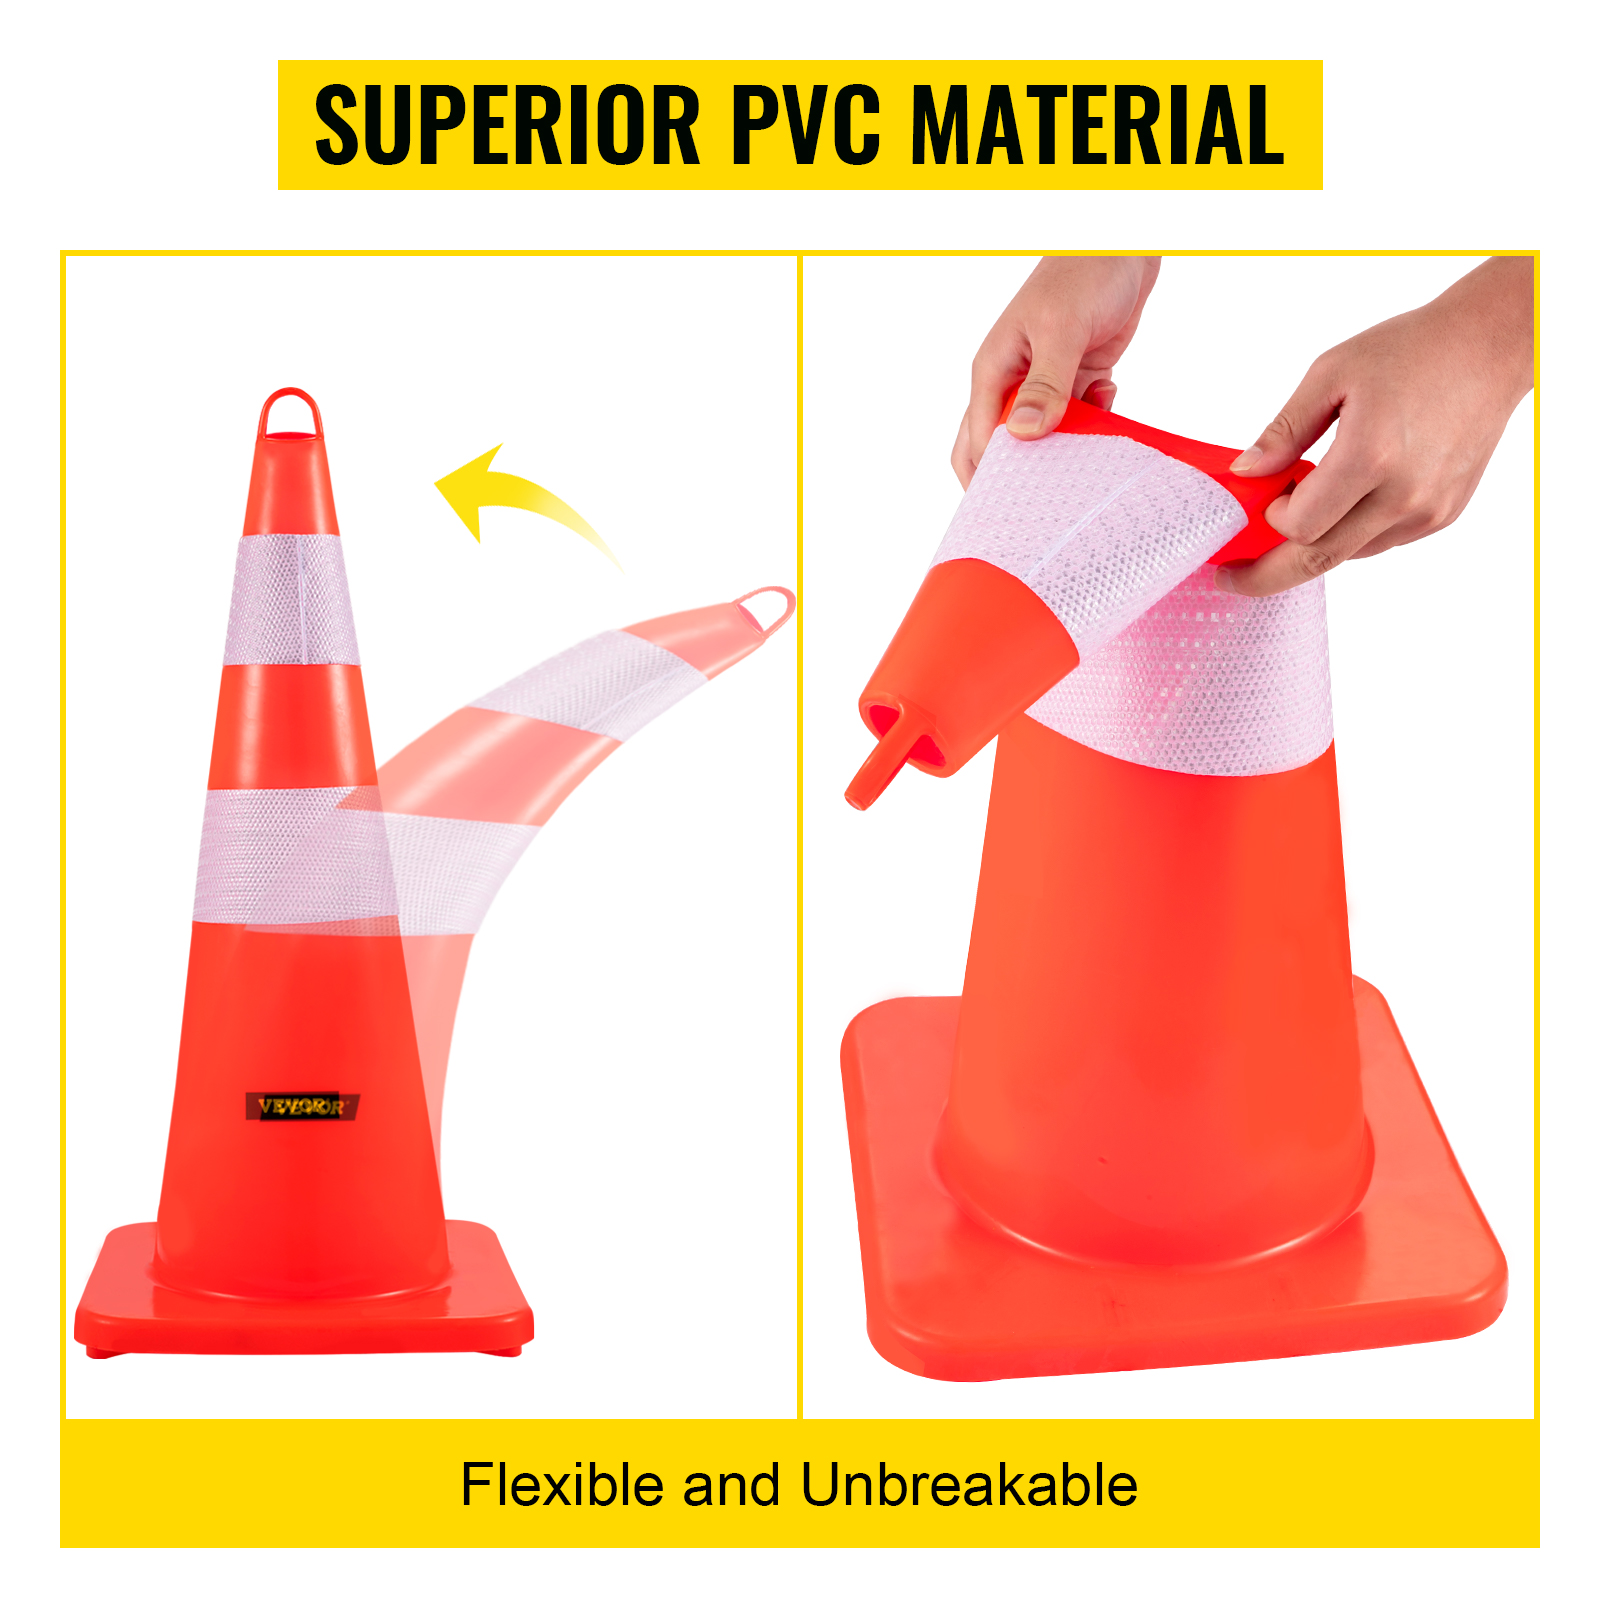 18 Unsheeted PVC Cones, Box of 100 - Safety Cones